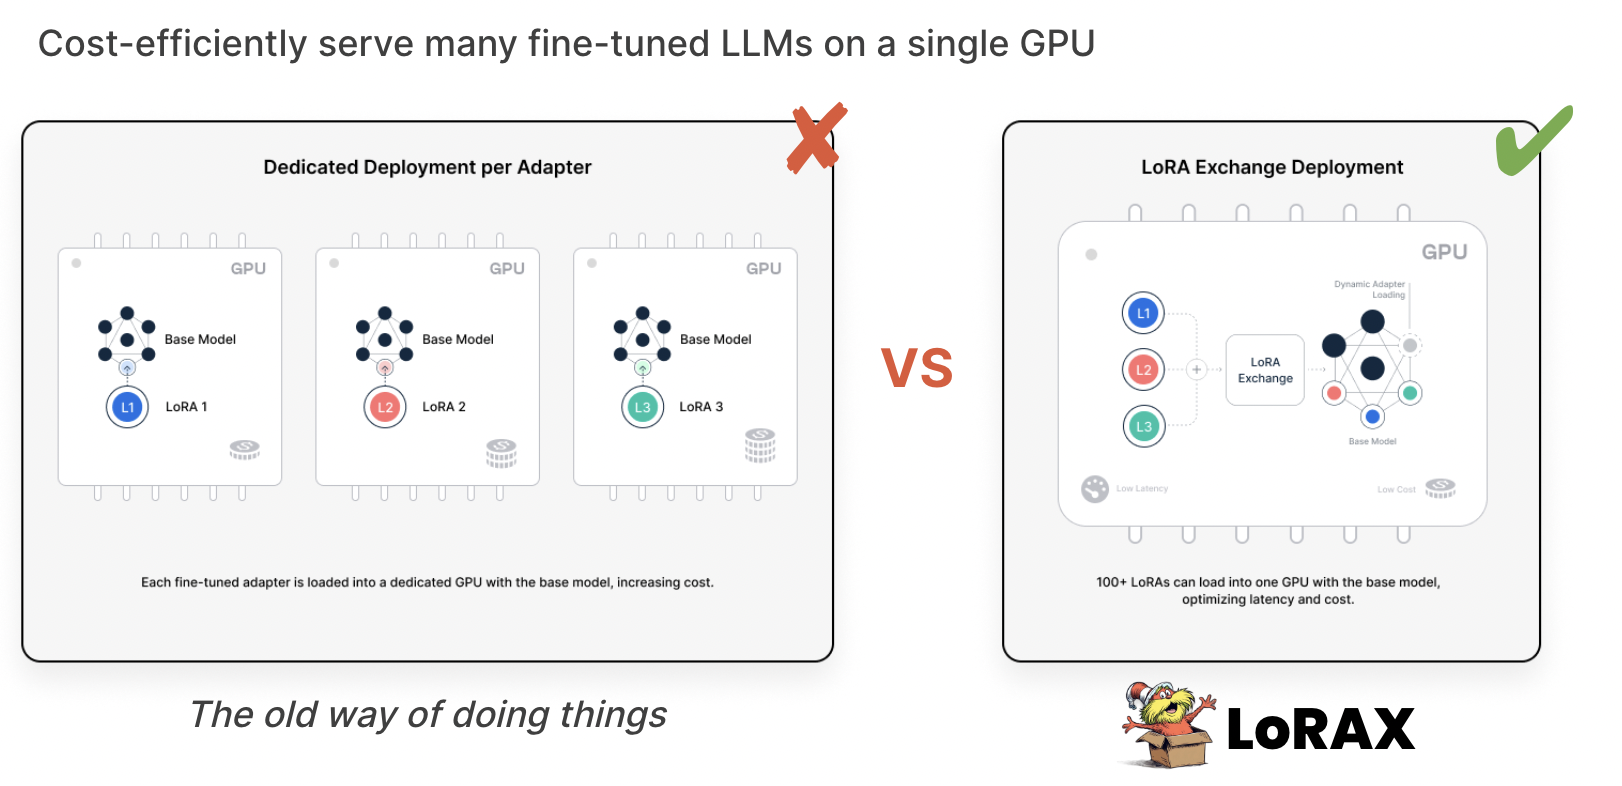 Cost-efficiently serve many fine-tuned LLMs on a single GPU with LoRAX